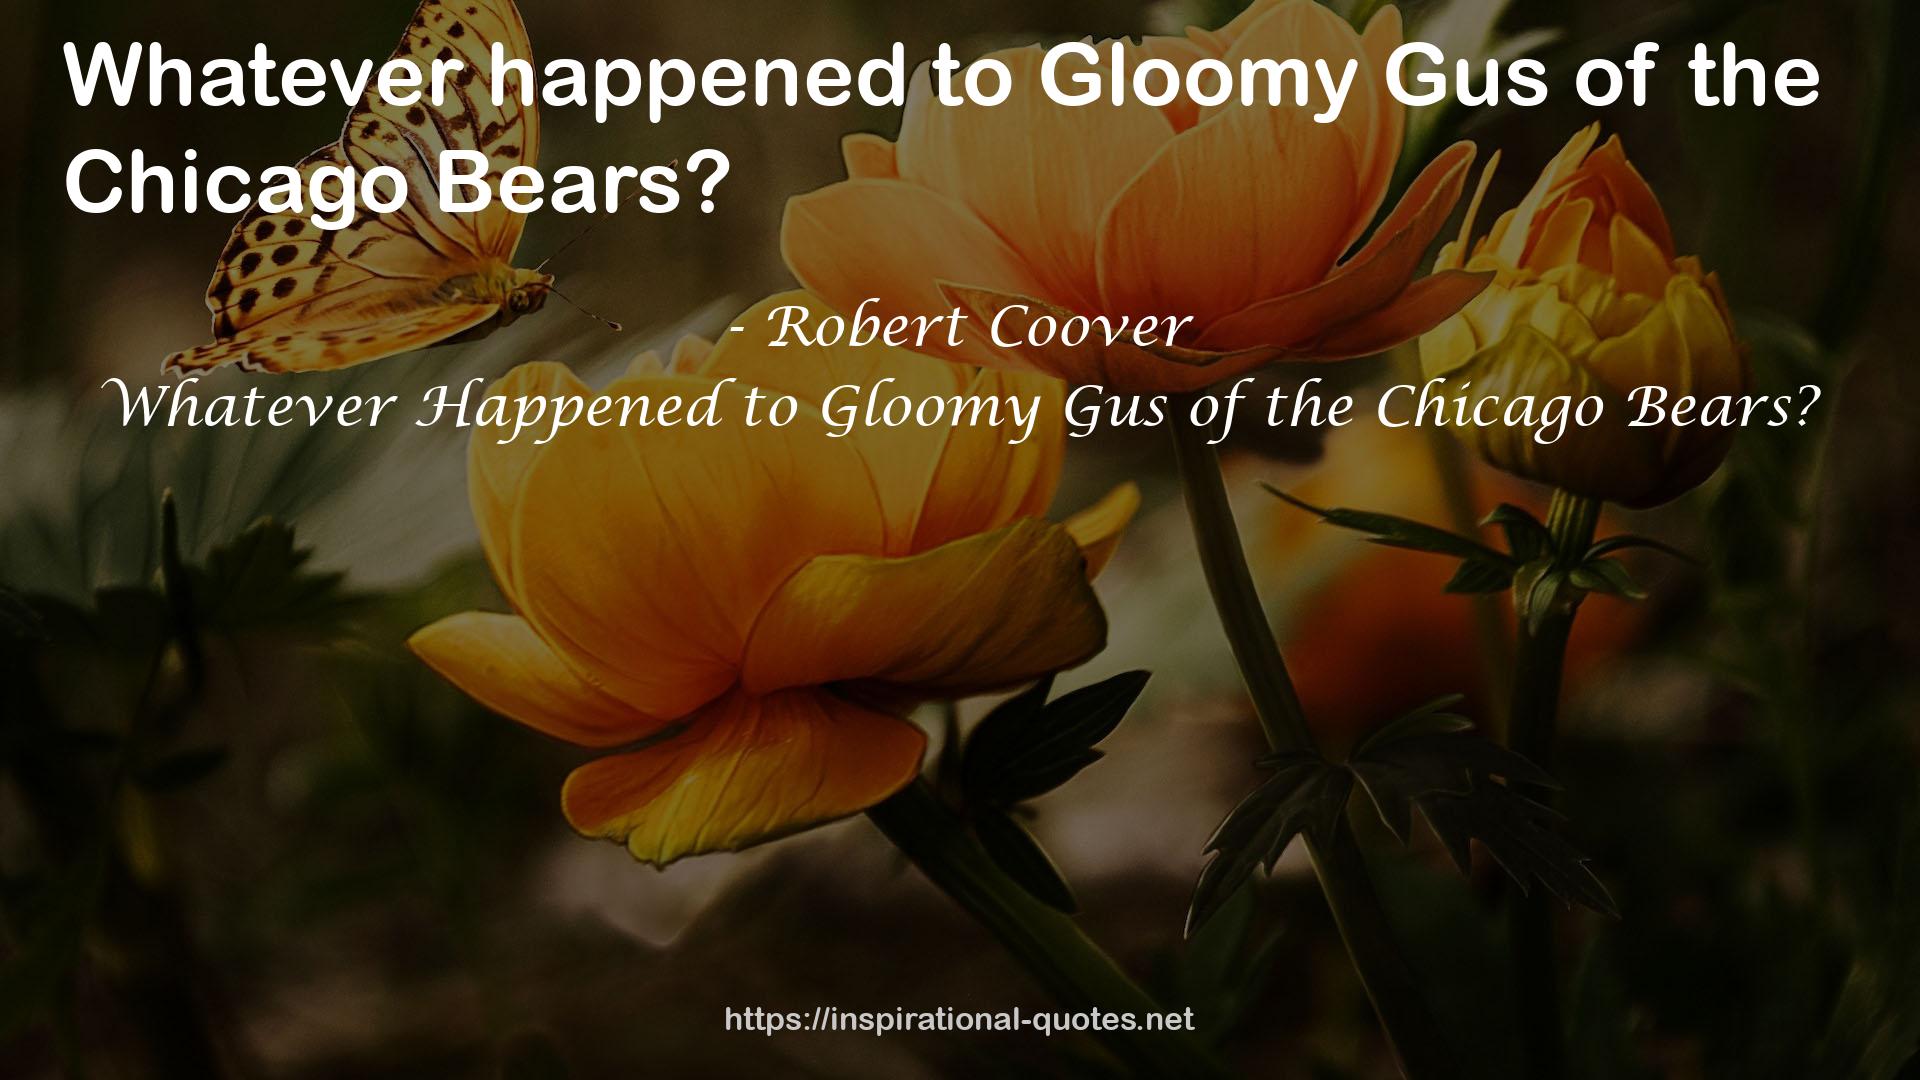 Whatever Happened to Gloomy Gus of the Chicago Bears? QUOTES